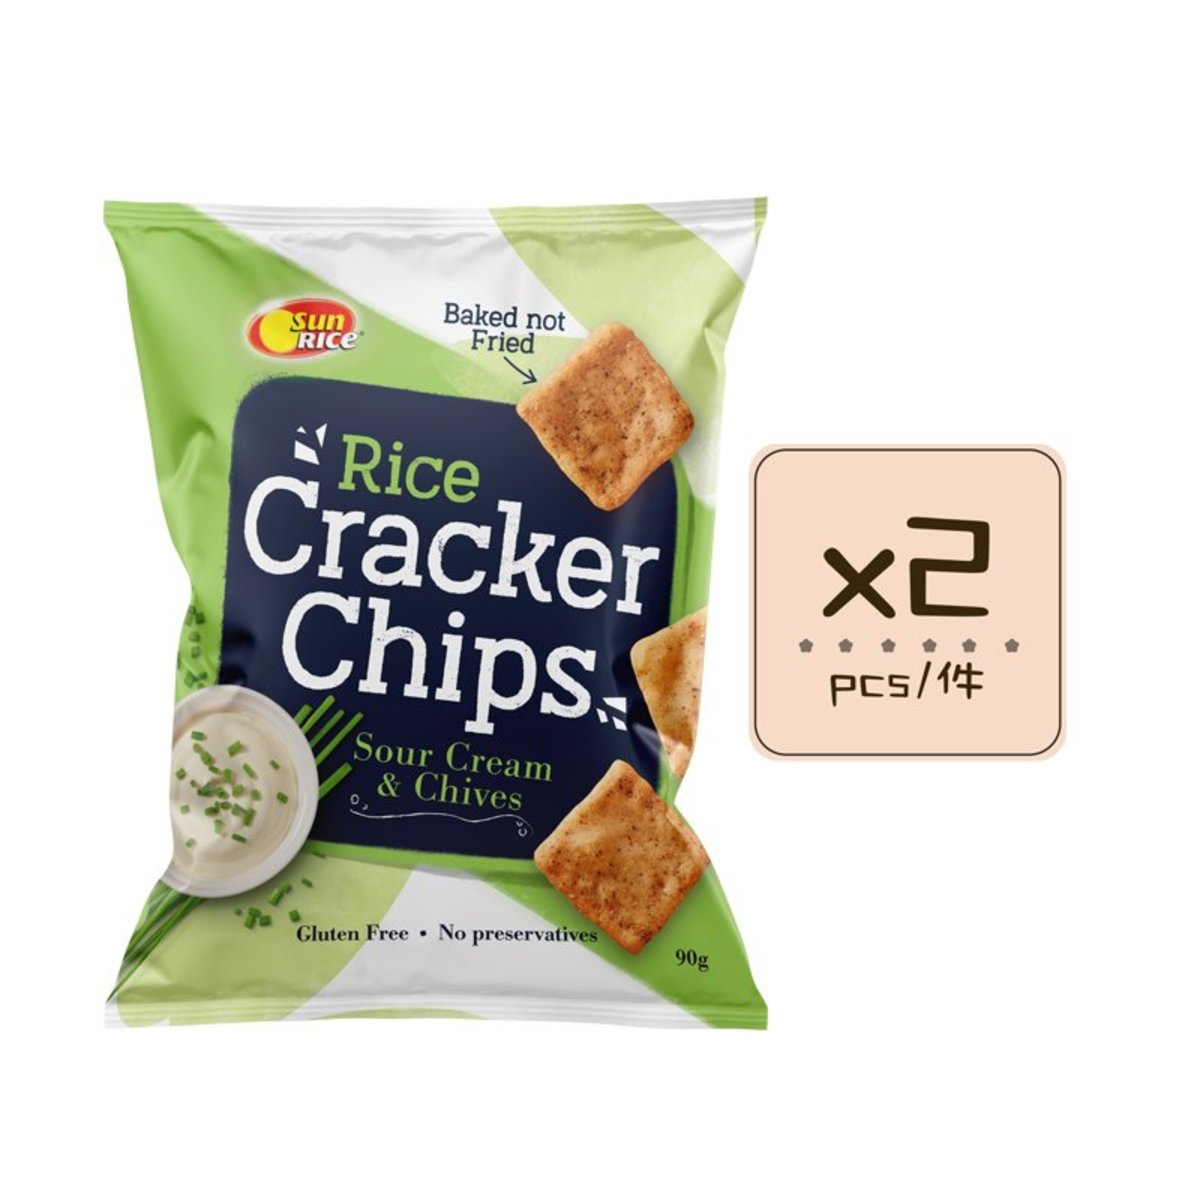 Sour Cream & Chives Rice Cracker Chips 90gx2